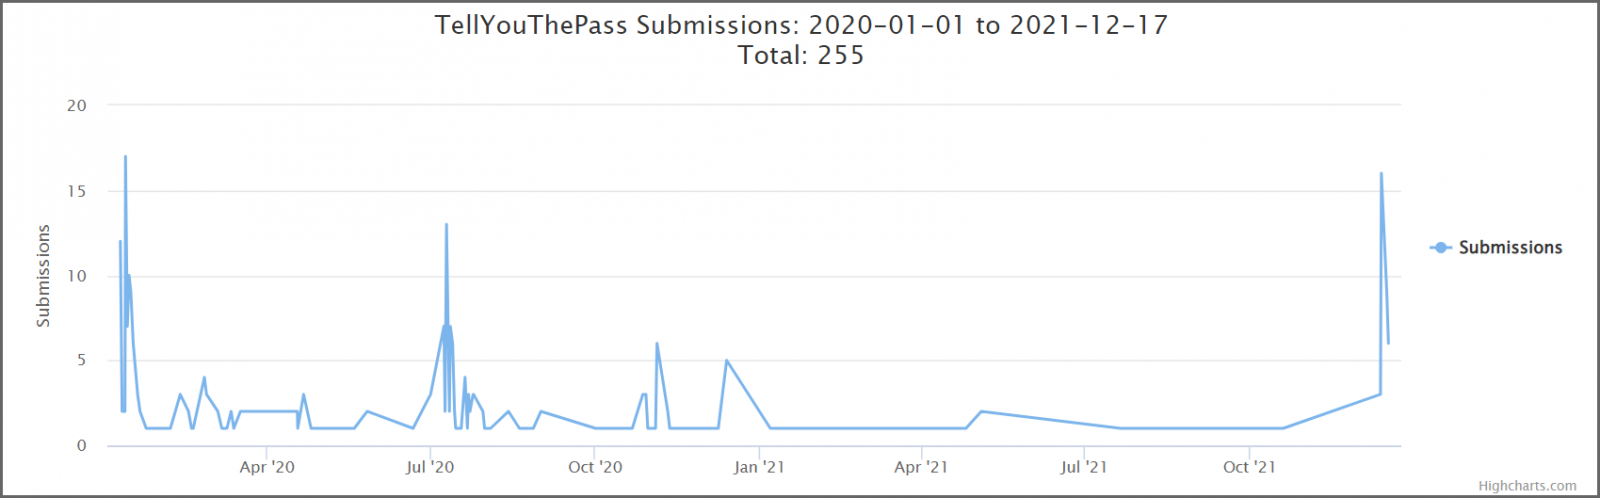 TellYouThePass ransomware submissions